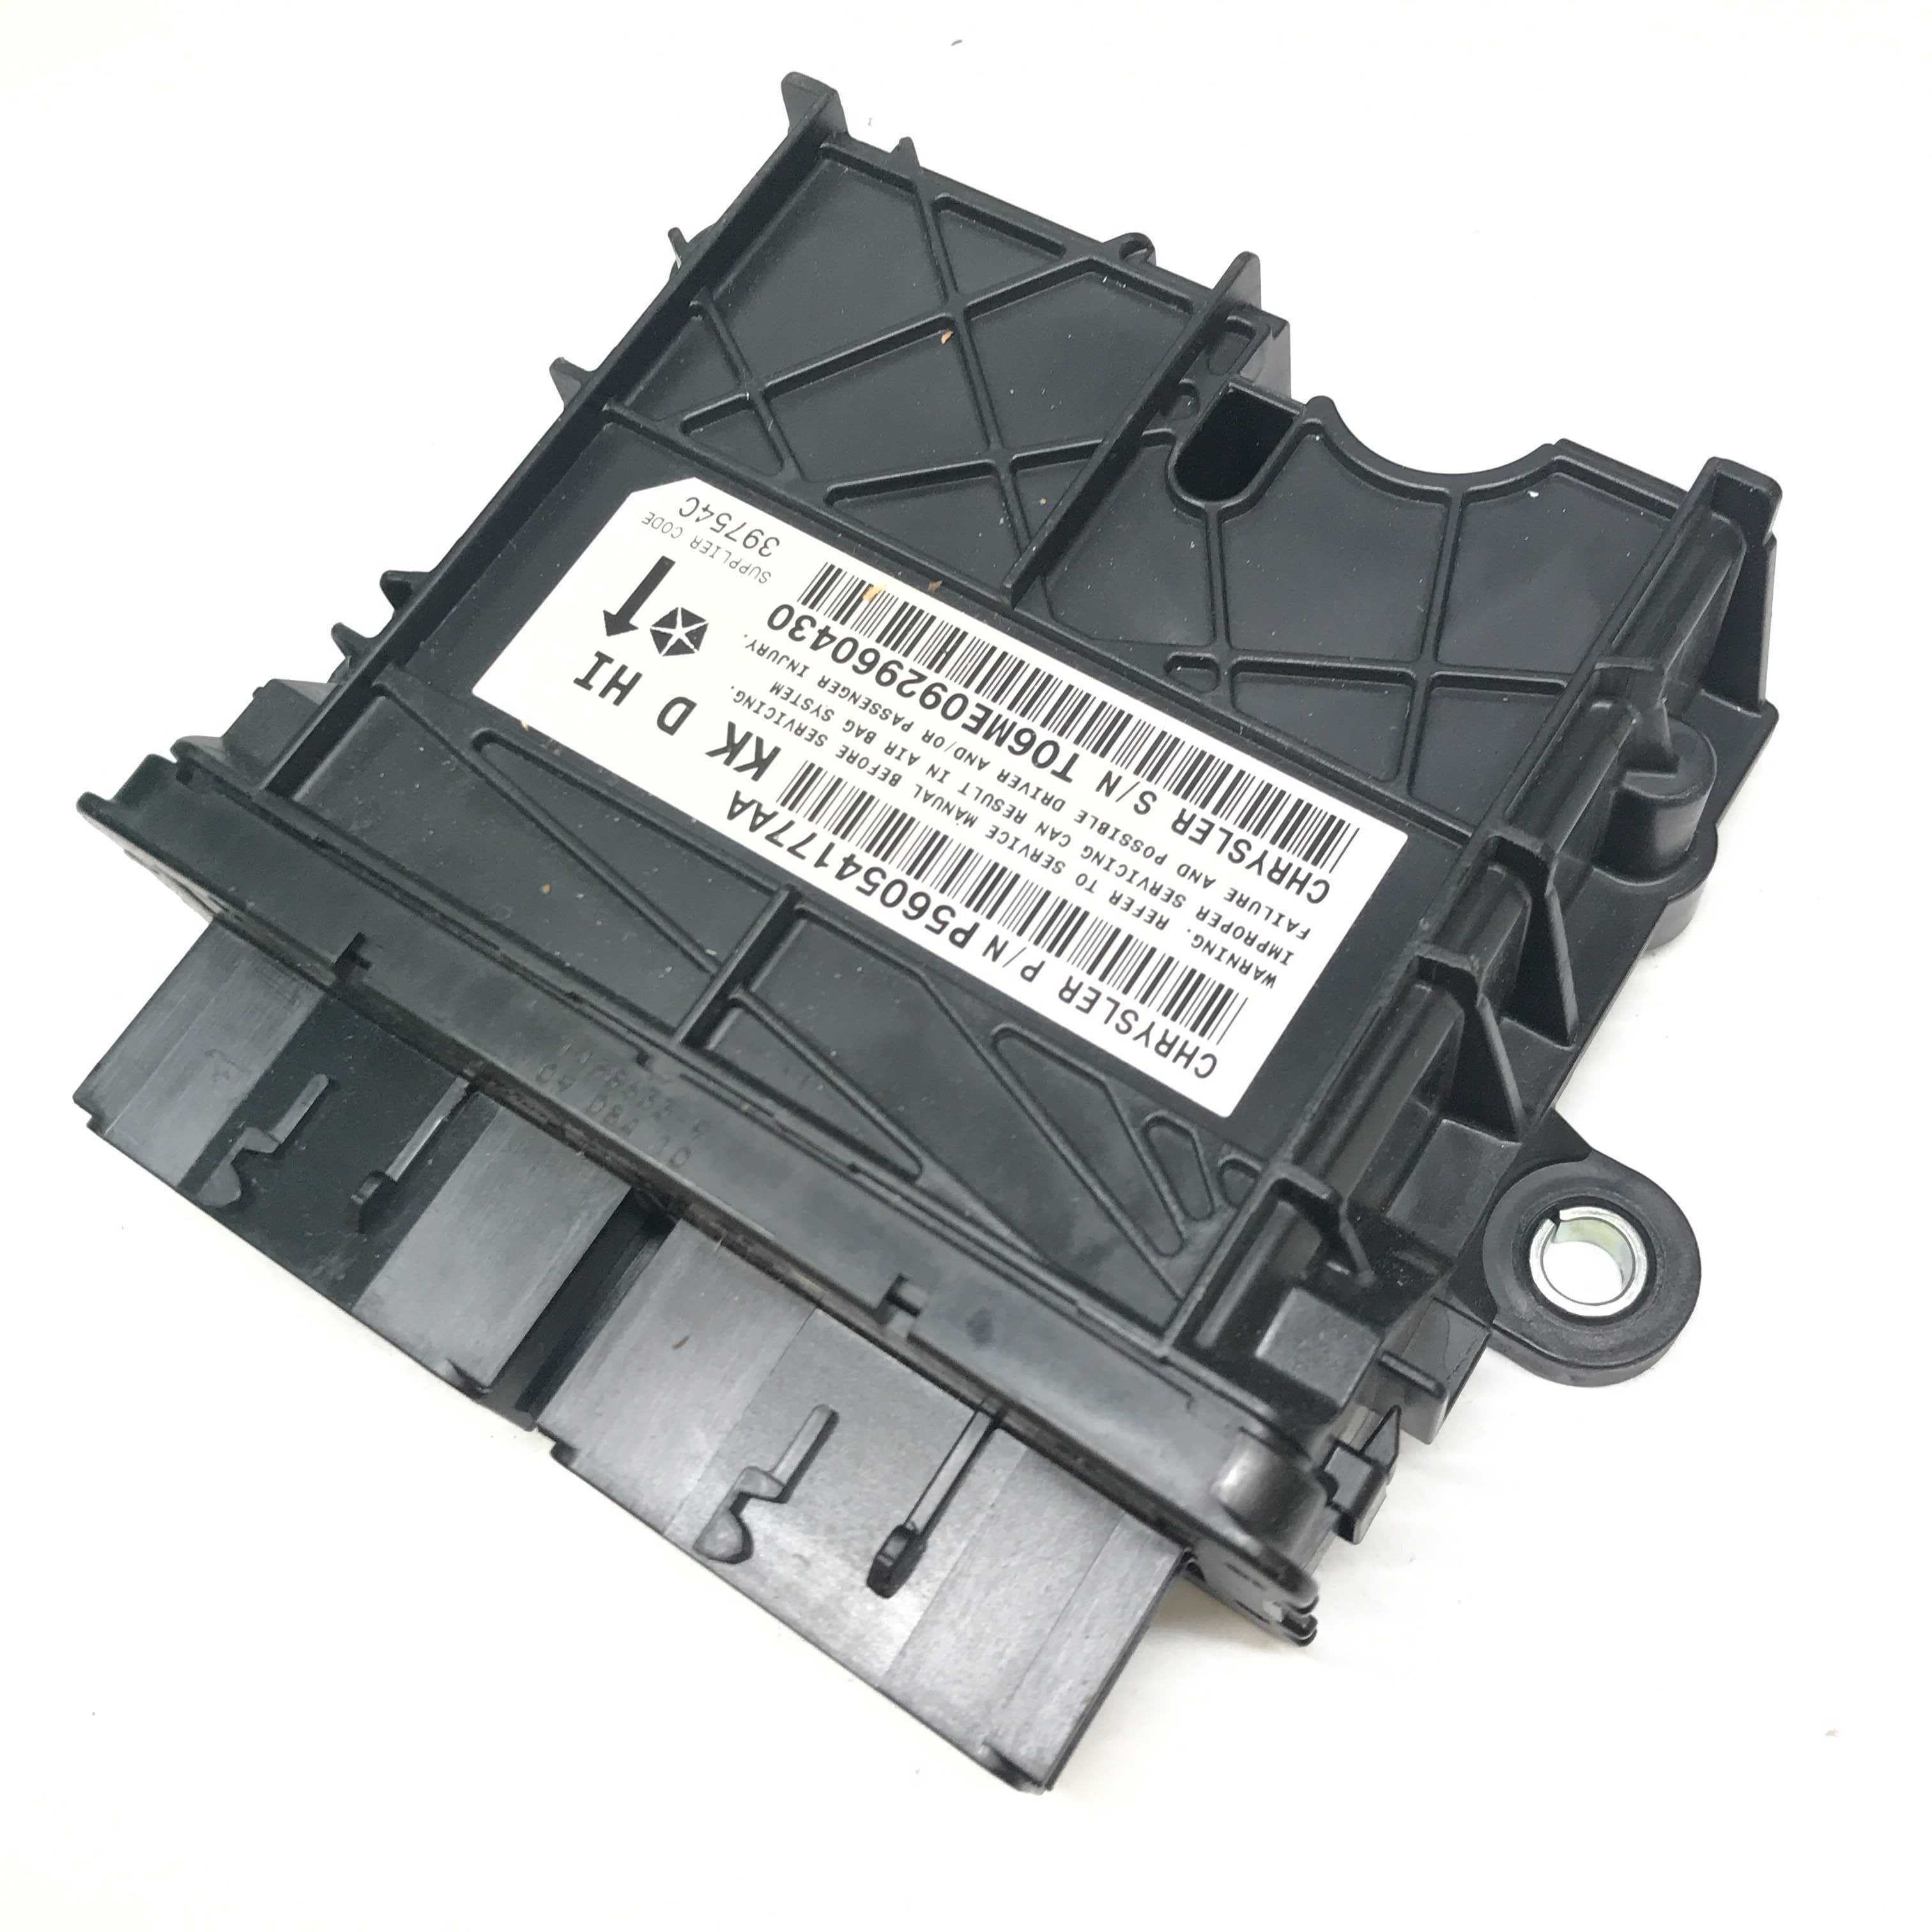 JEEP WRANGLER SRS ORC ORM Occupant Control Module - Airbag Computer Control Module PART #P68185856AB